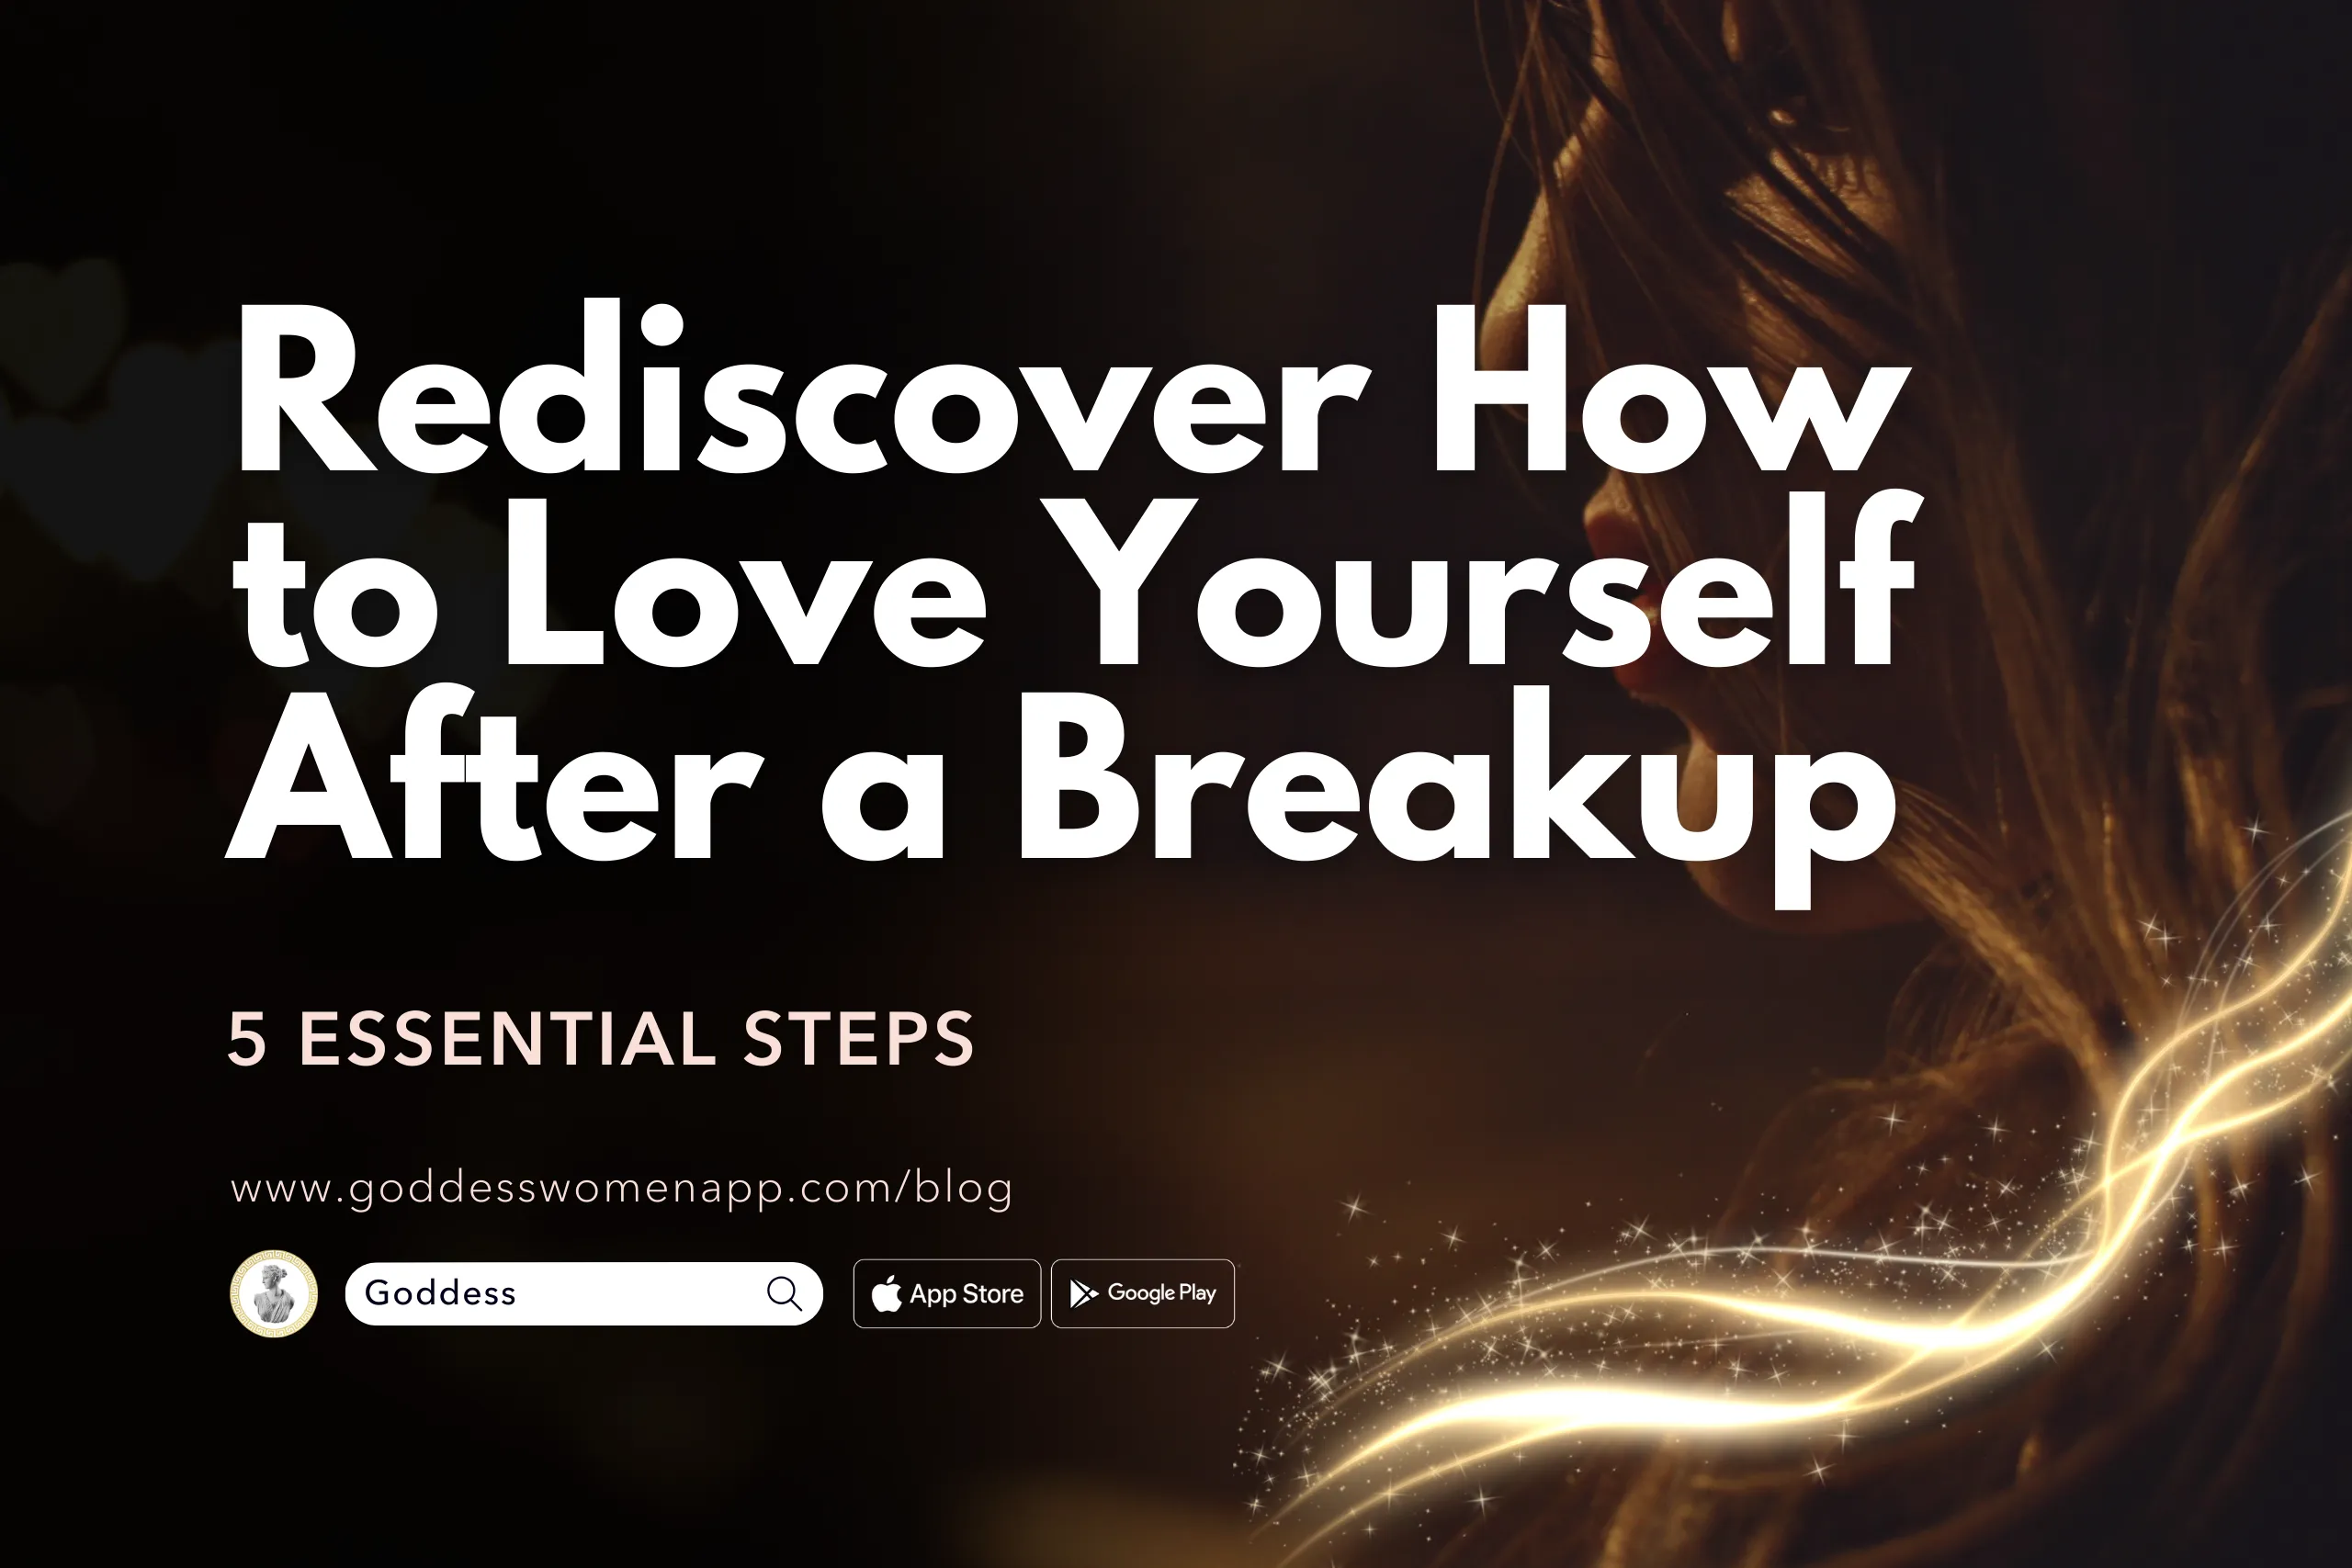 5 Essential Steps to Rediscover How to Love Yourself After a Breakup